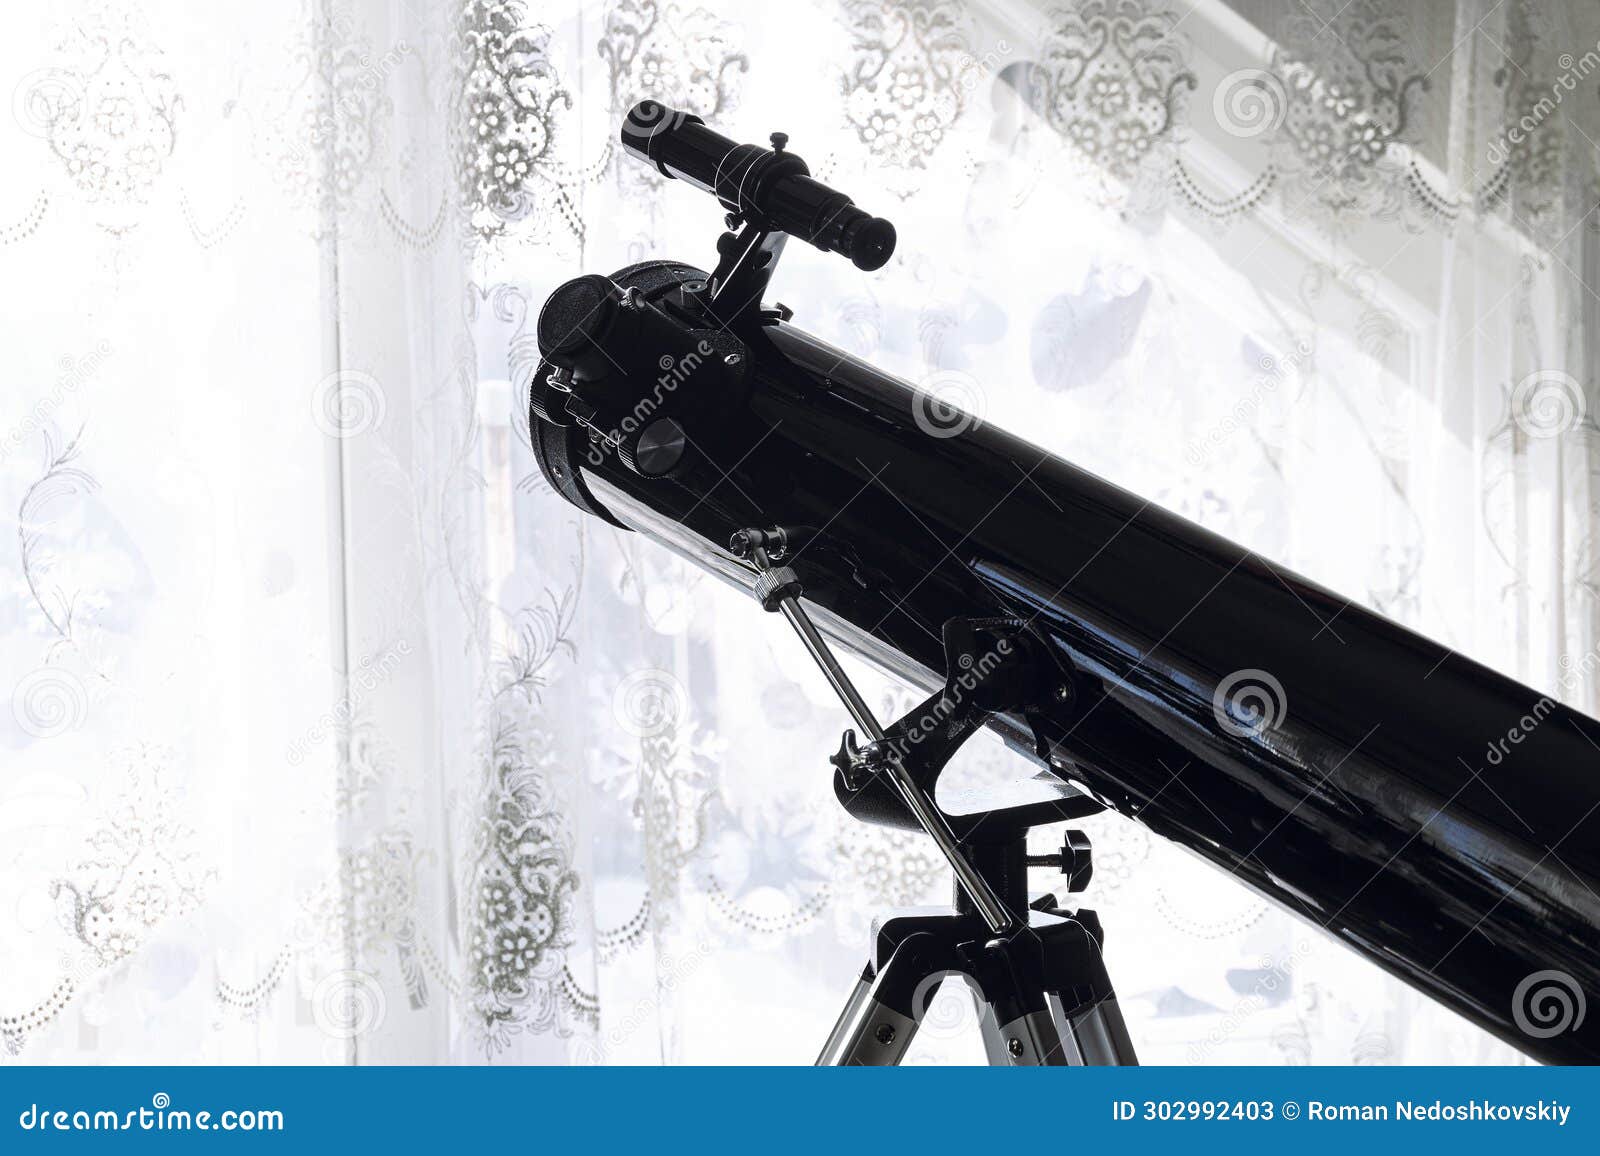 mirror home telescope on azimuth mount